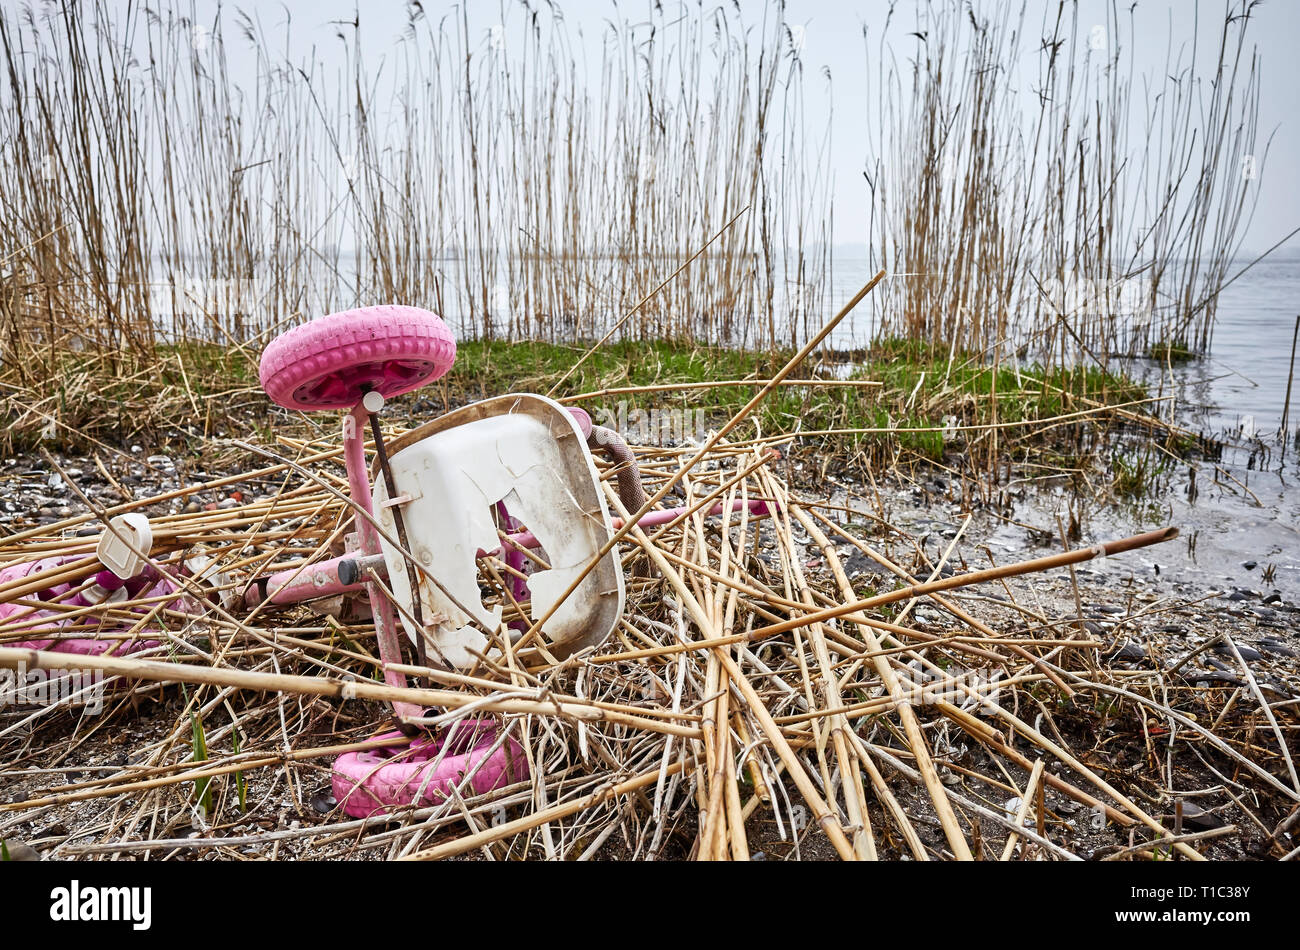 Old kids tricycle discarded at a river bank, environment pollution or a crime scene concept picture. Stock Photo